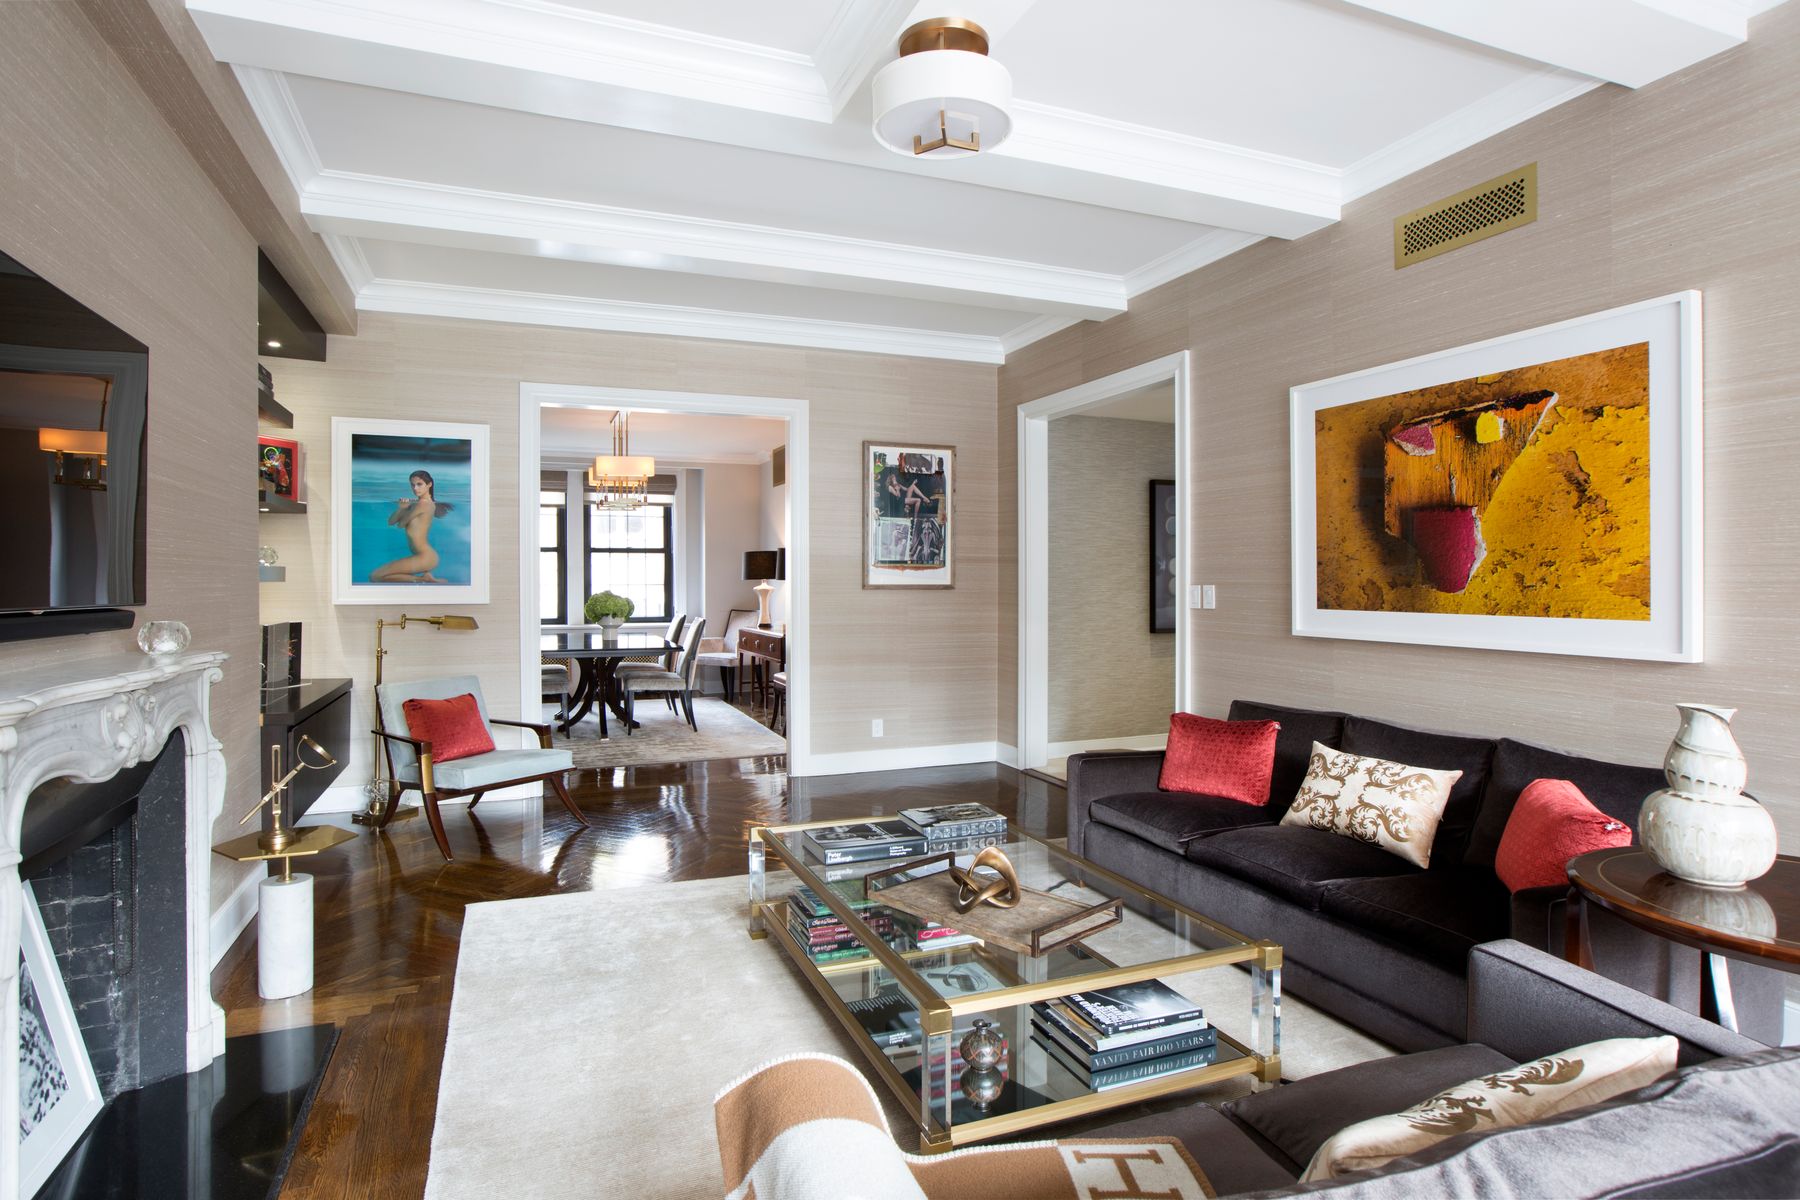 Martine Capdevielle_Luxury Real Estate NYC_21 East 66th St Apt 5w 9.jpg